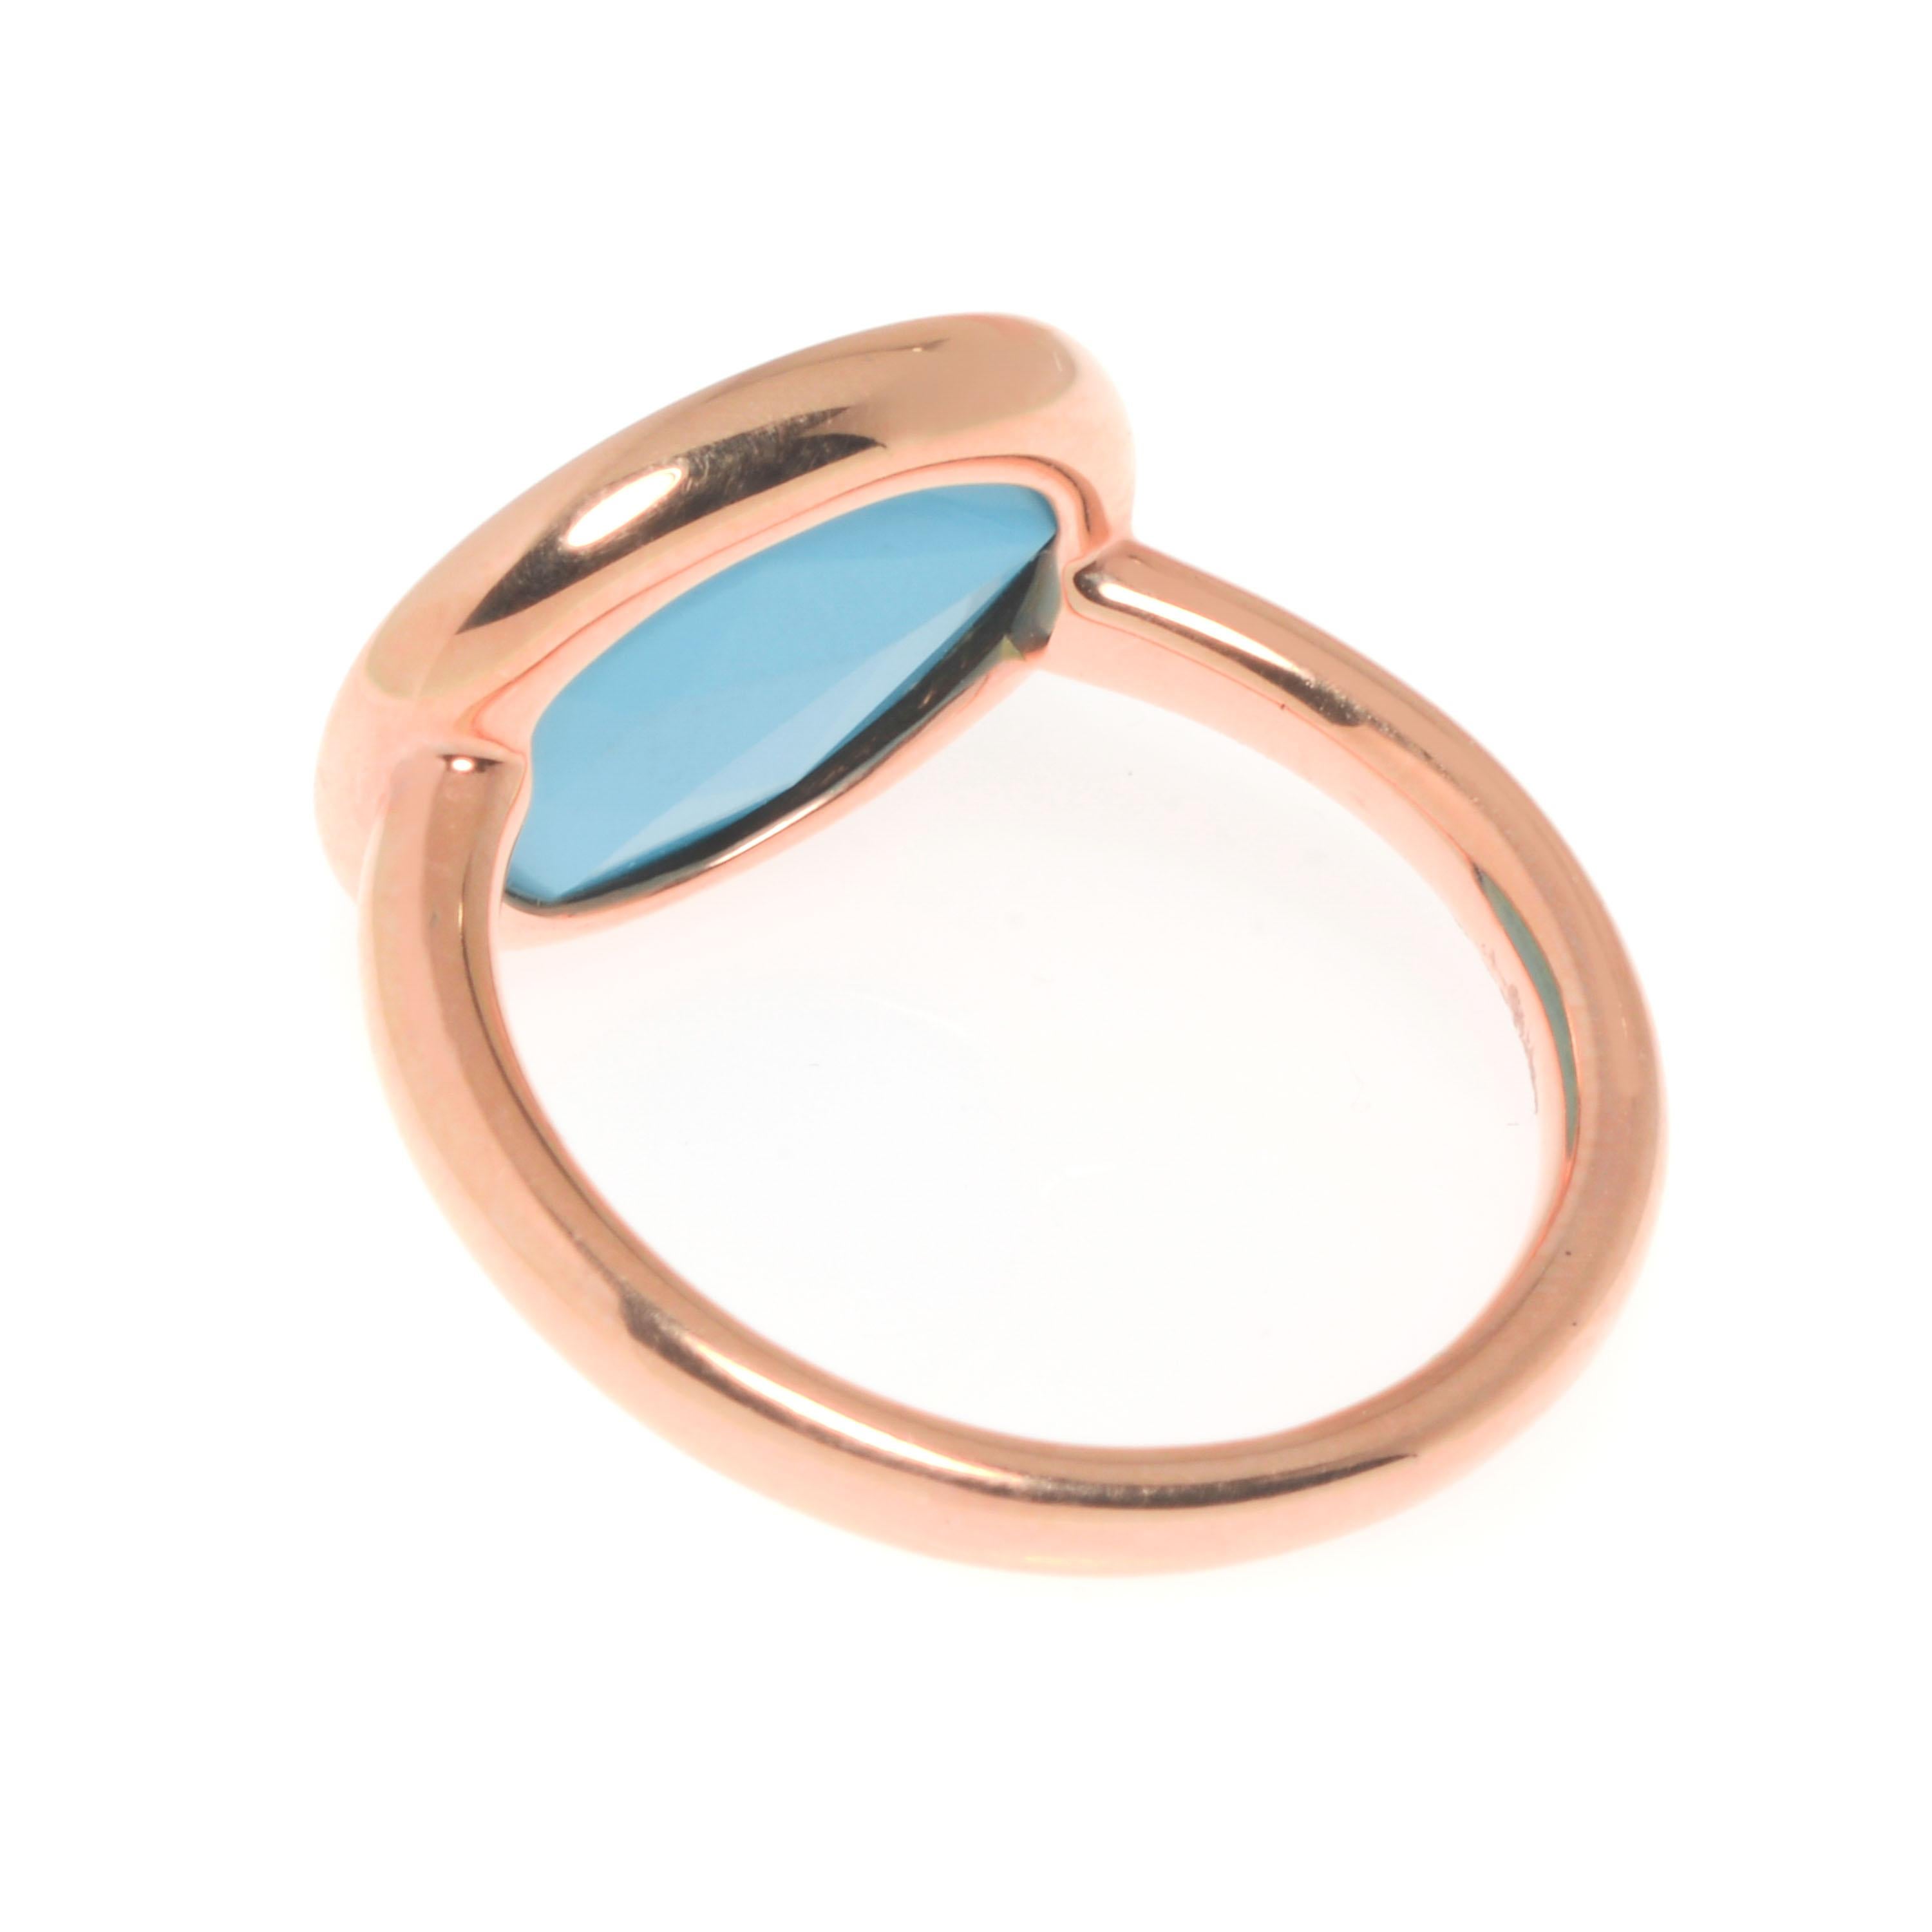 Contemporary Mimi Milano 18K Rose Gold, Turquoise Cocktail Ring sz 7.5 For Sale